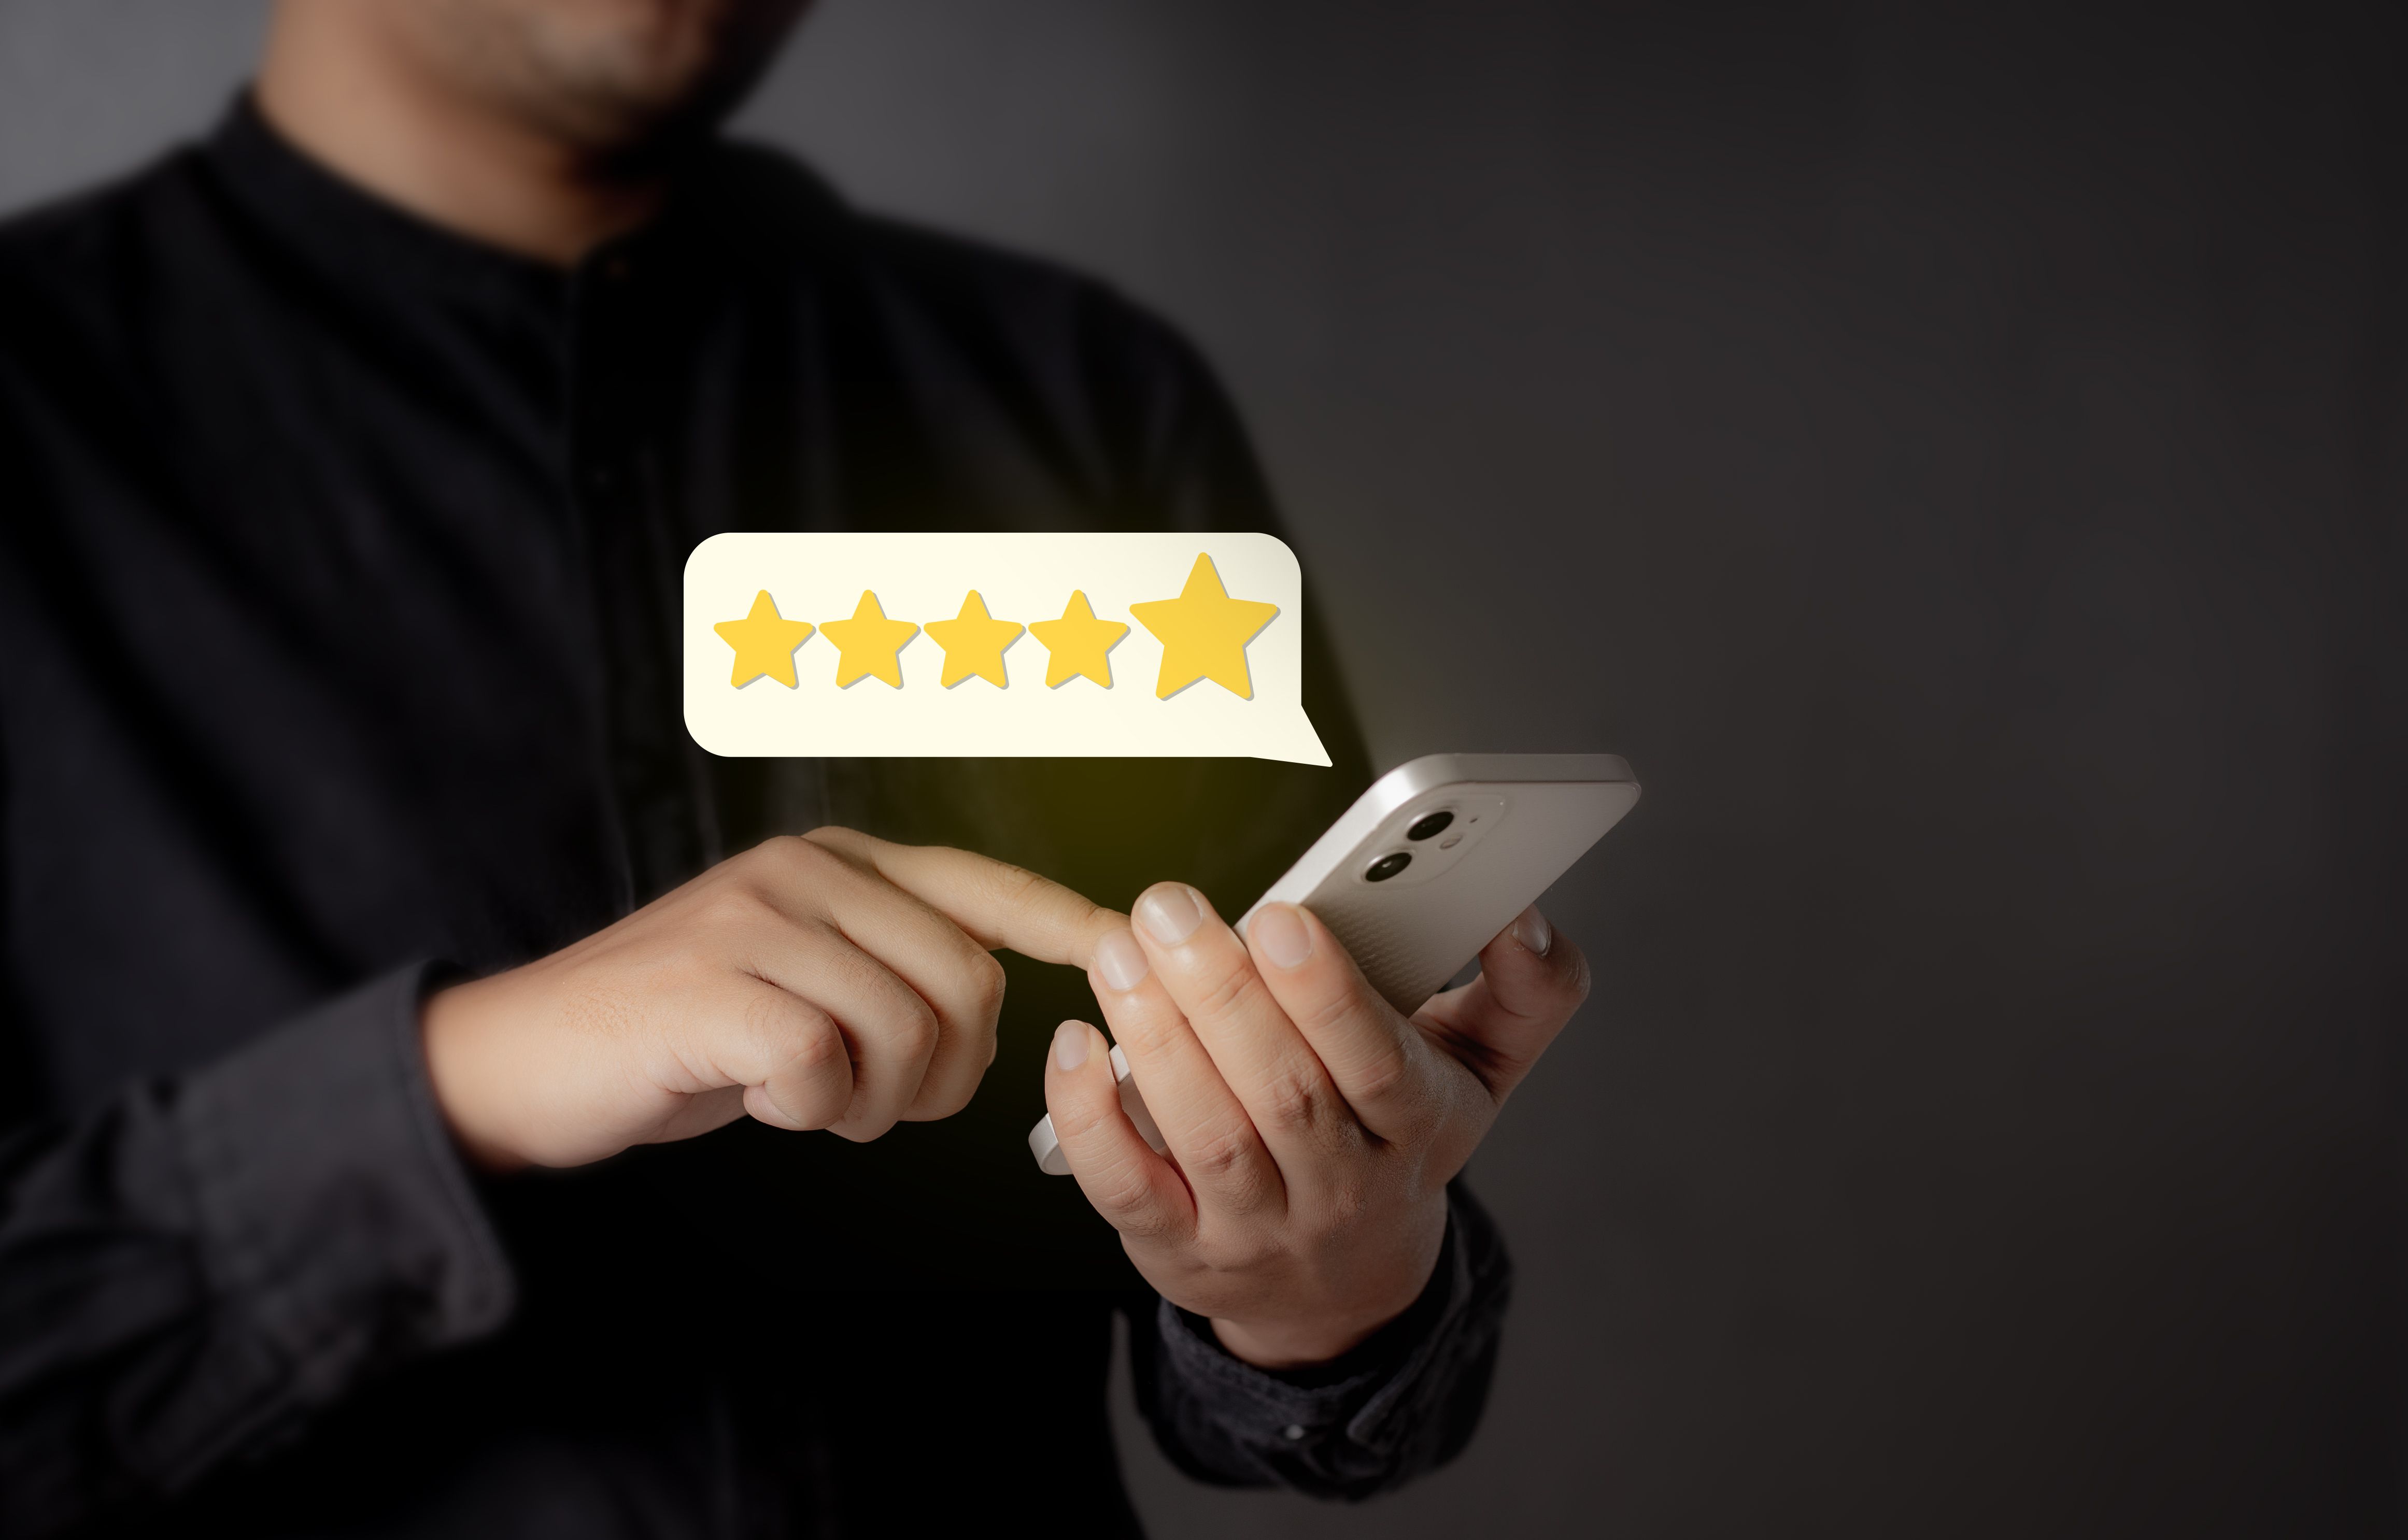 Guide on how to get, manage, and share patients' reviews for the chiropractic business.